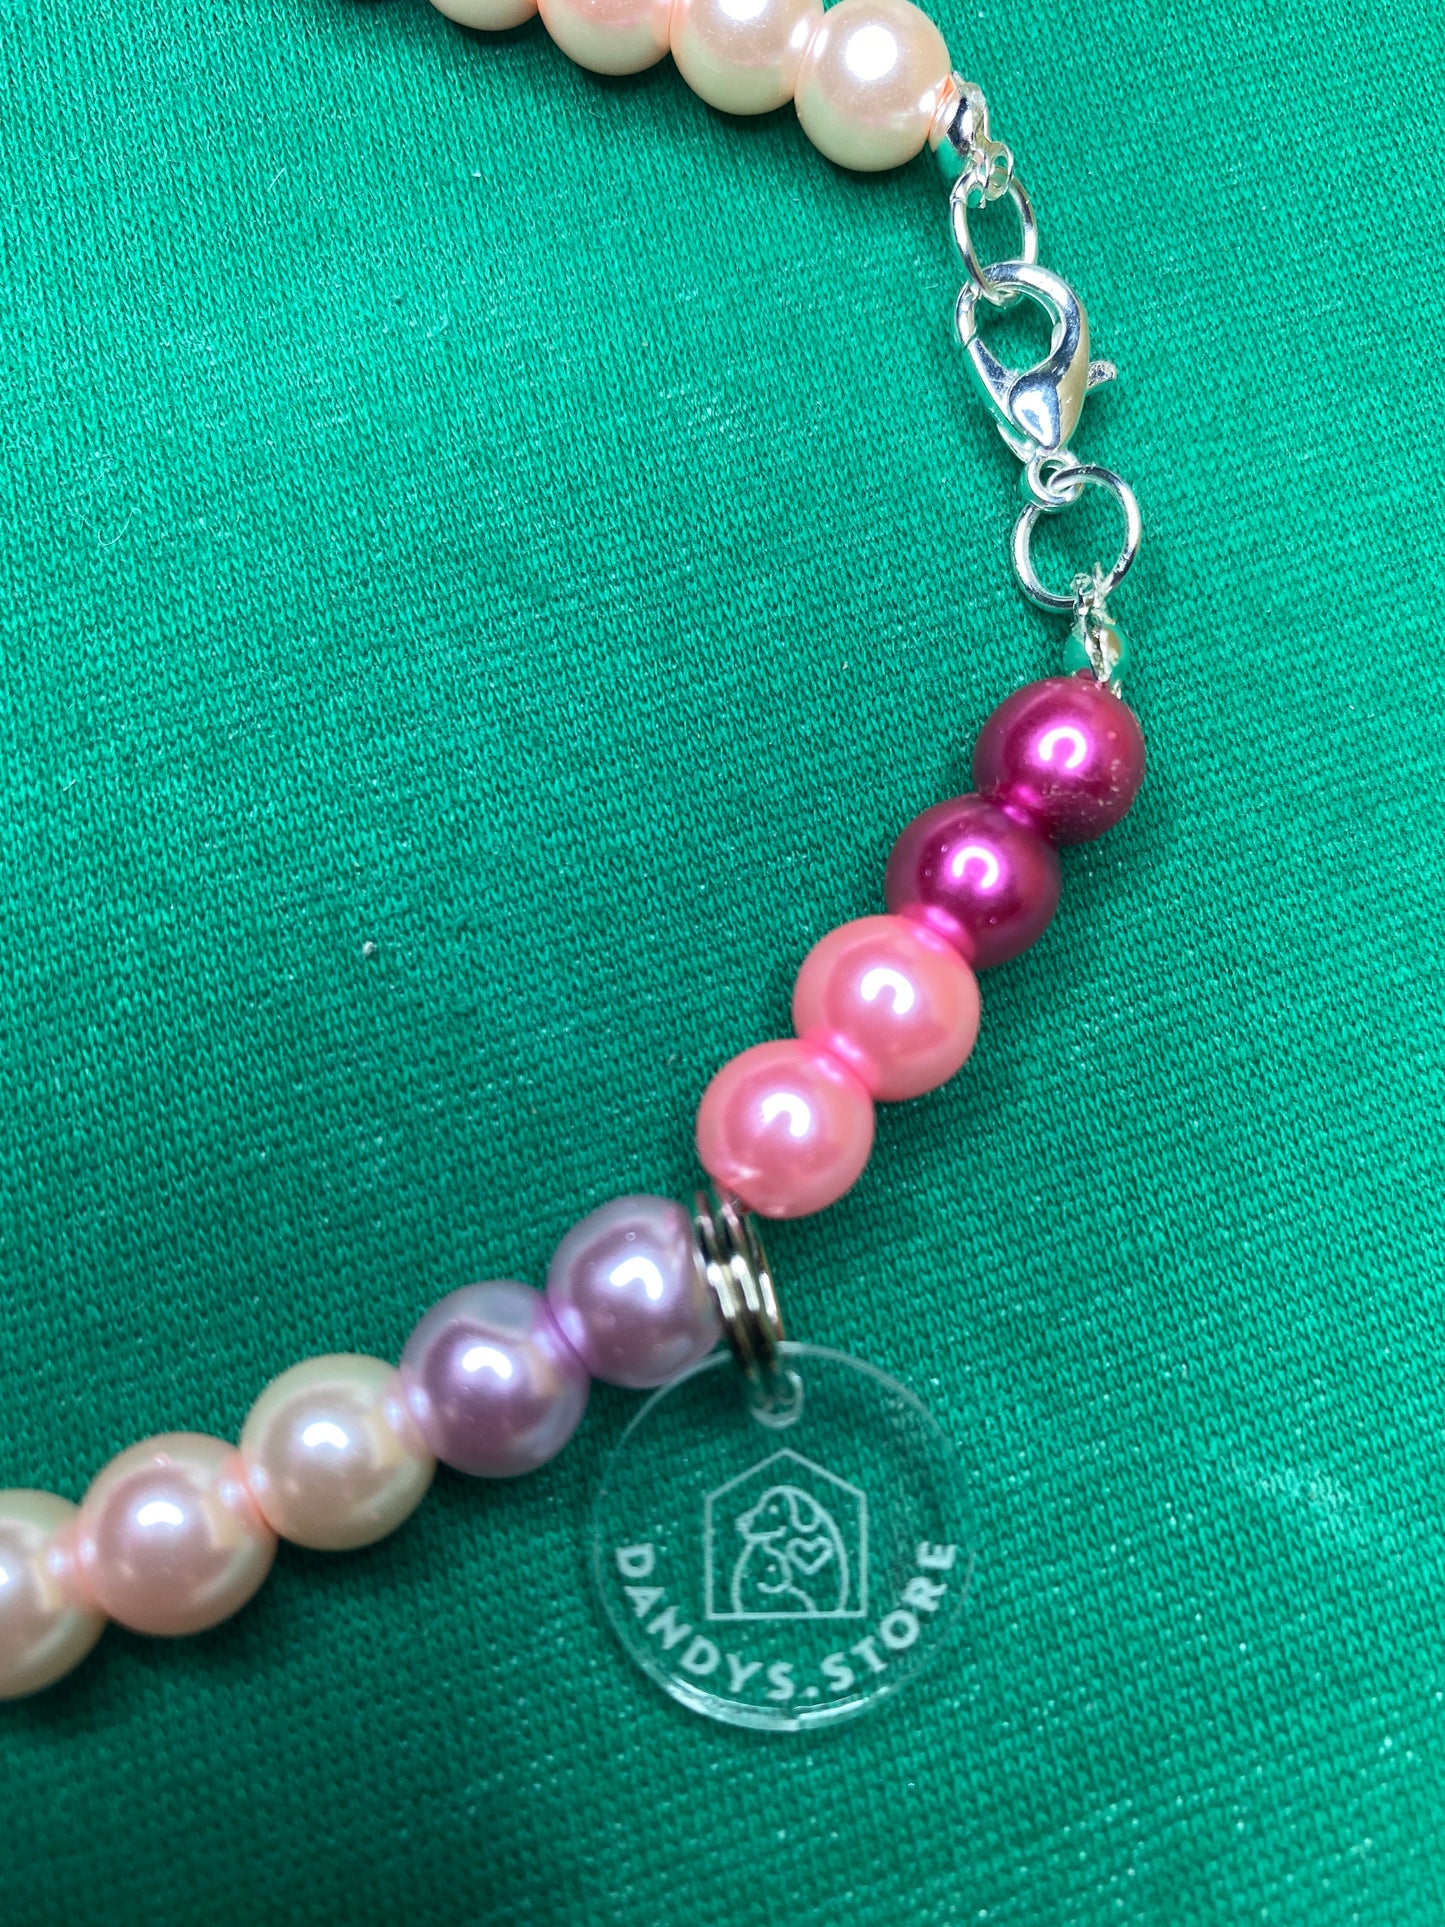 Pearl necklace with pink bow and silver clasp by Dandy's Store. Handmade with love for your Princess.